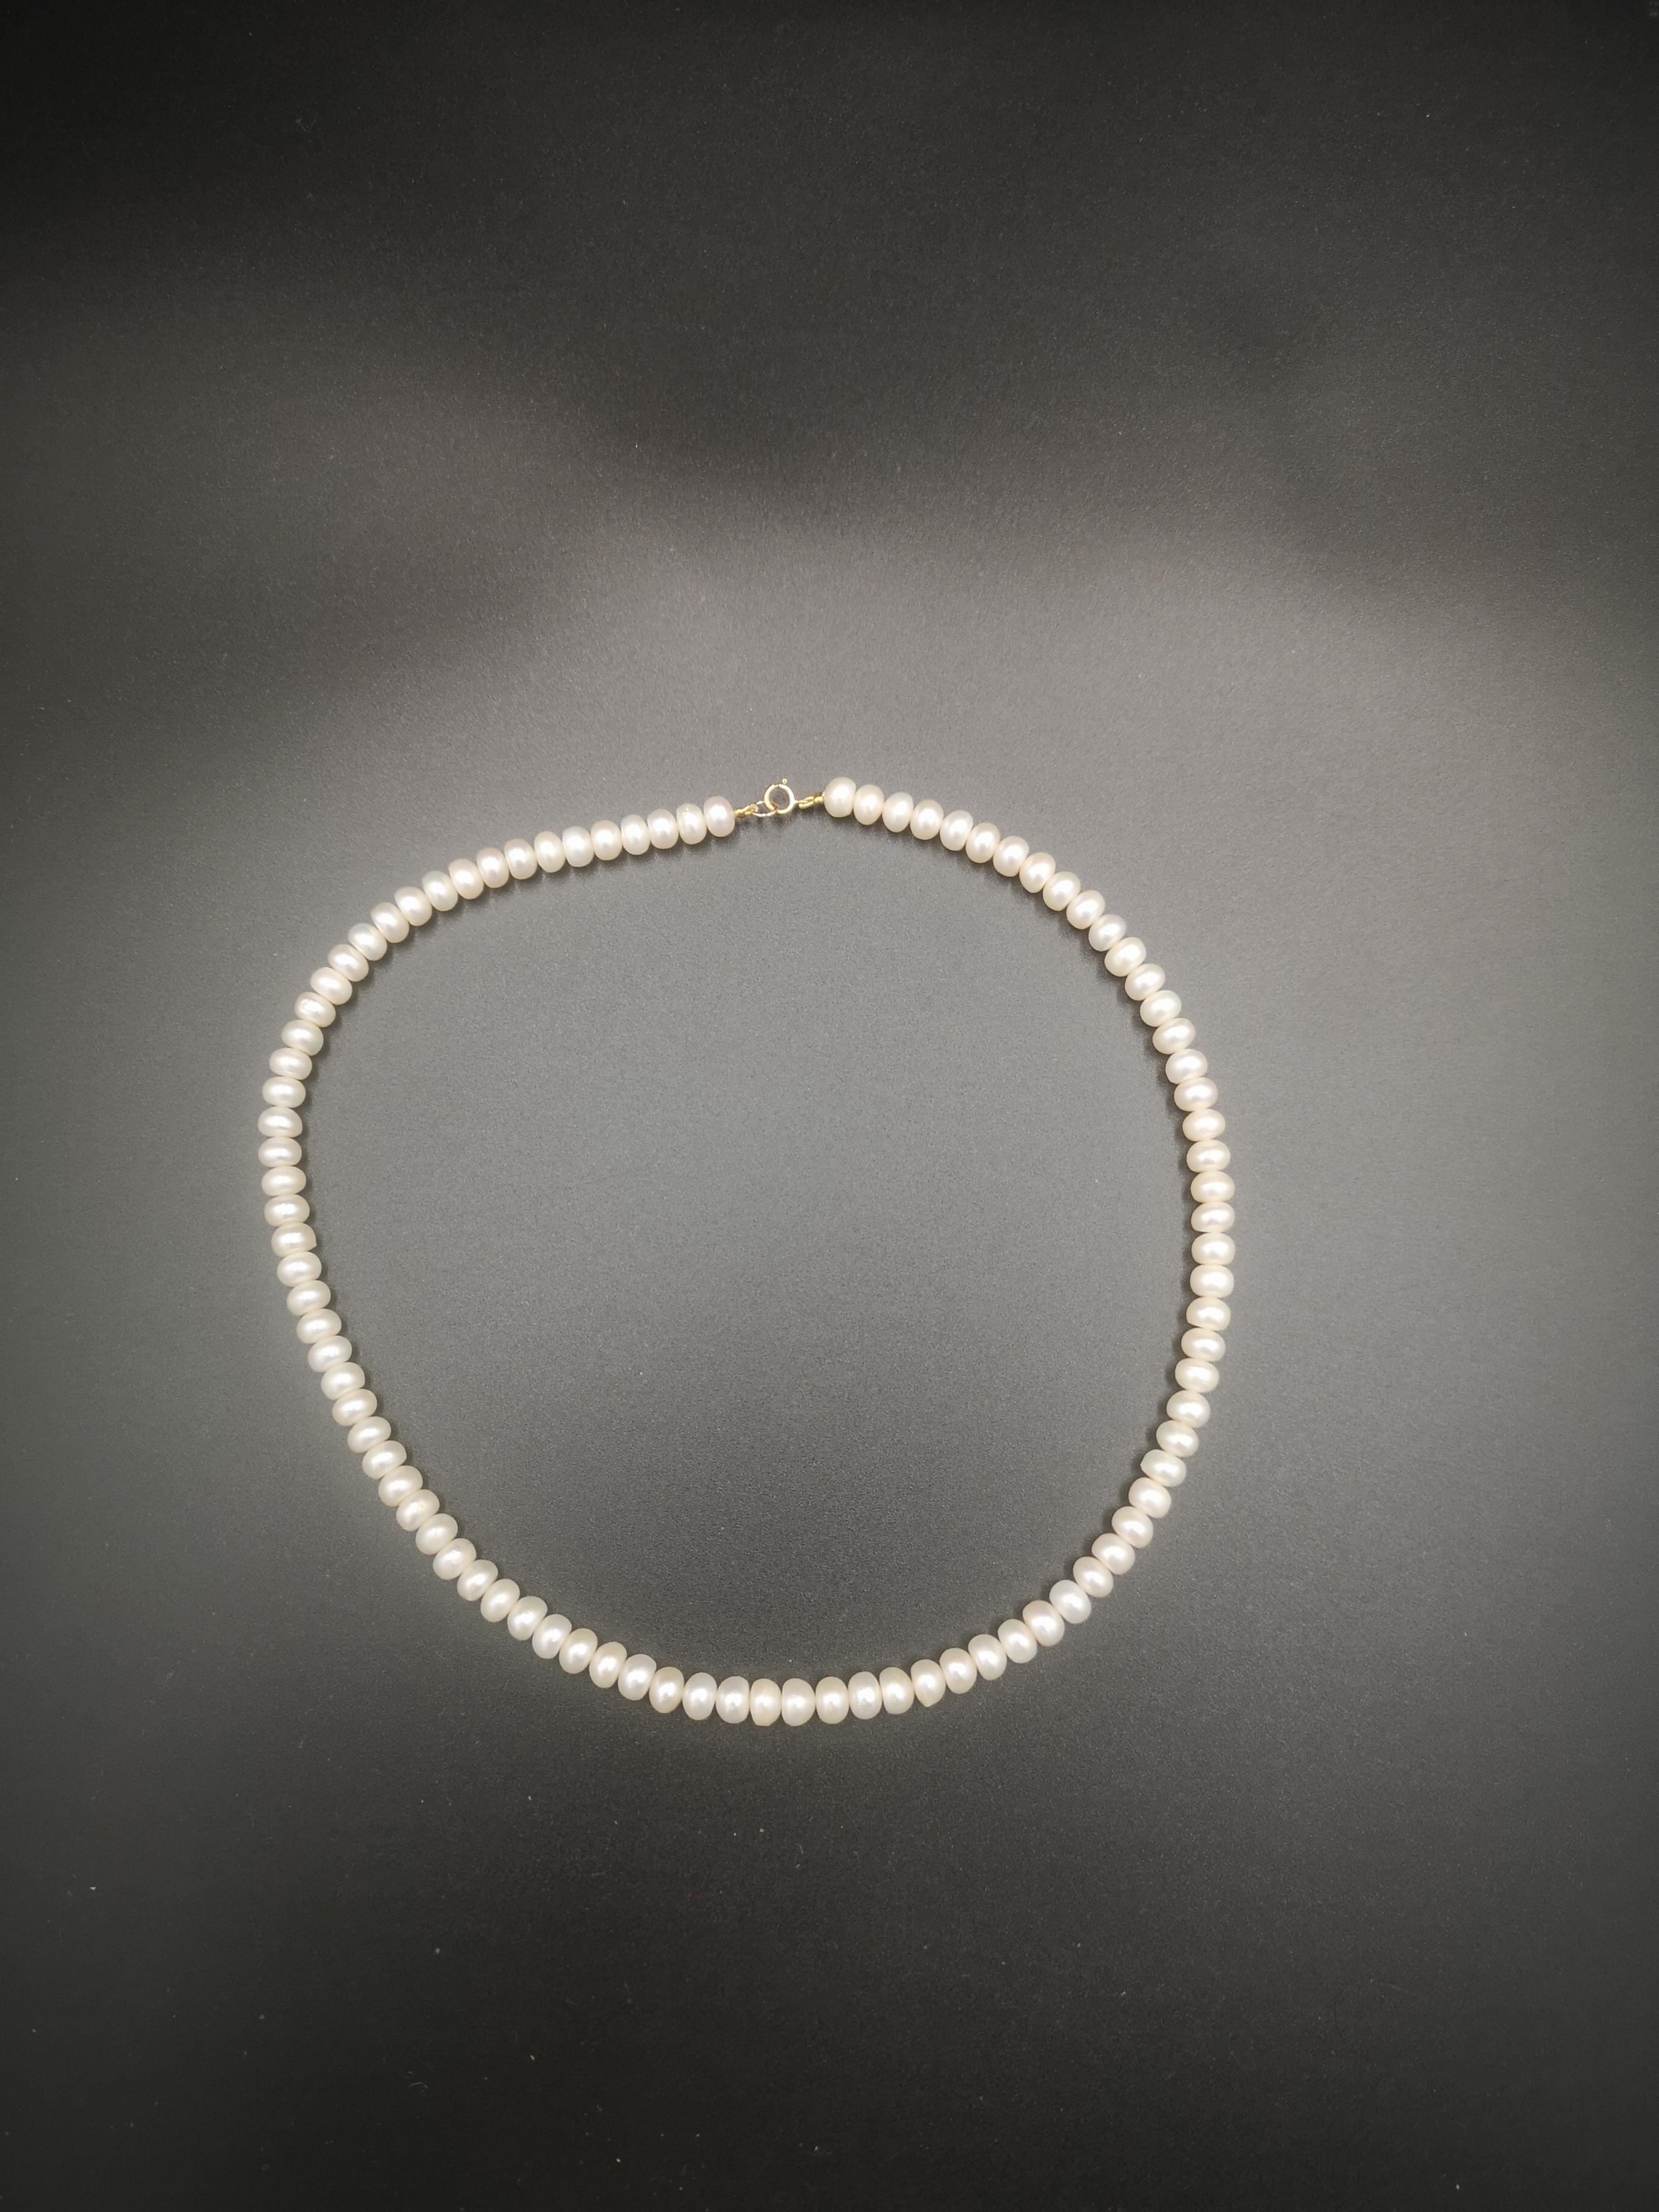 Pearl necklace with 9ct gold clasp - Image 2 of 3